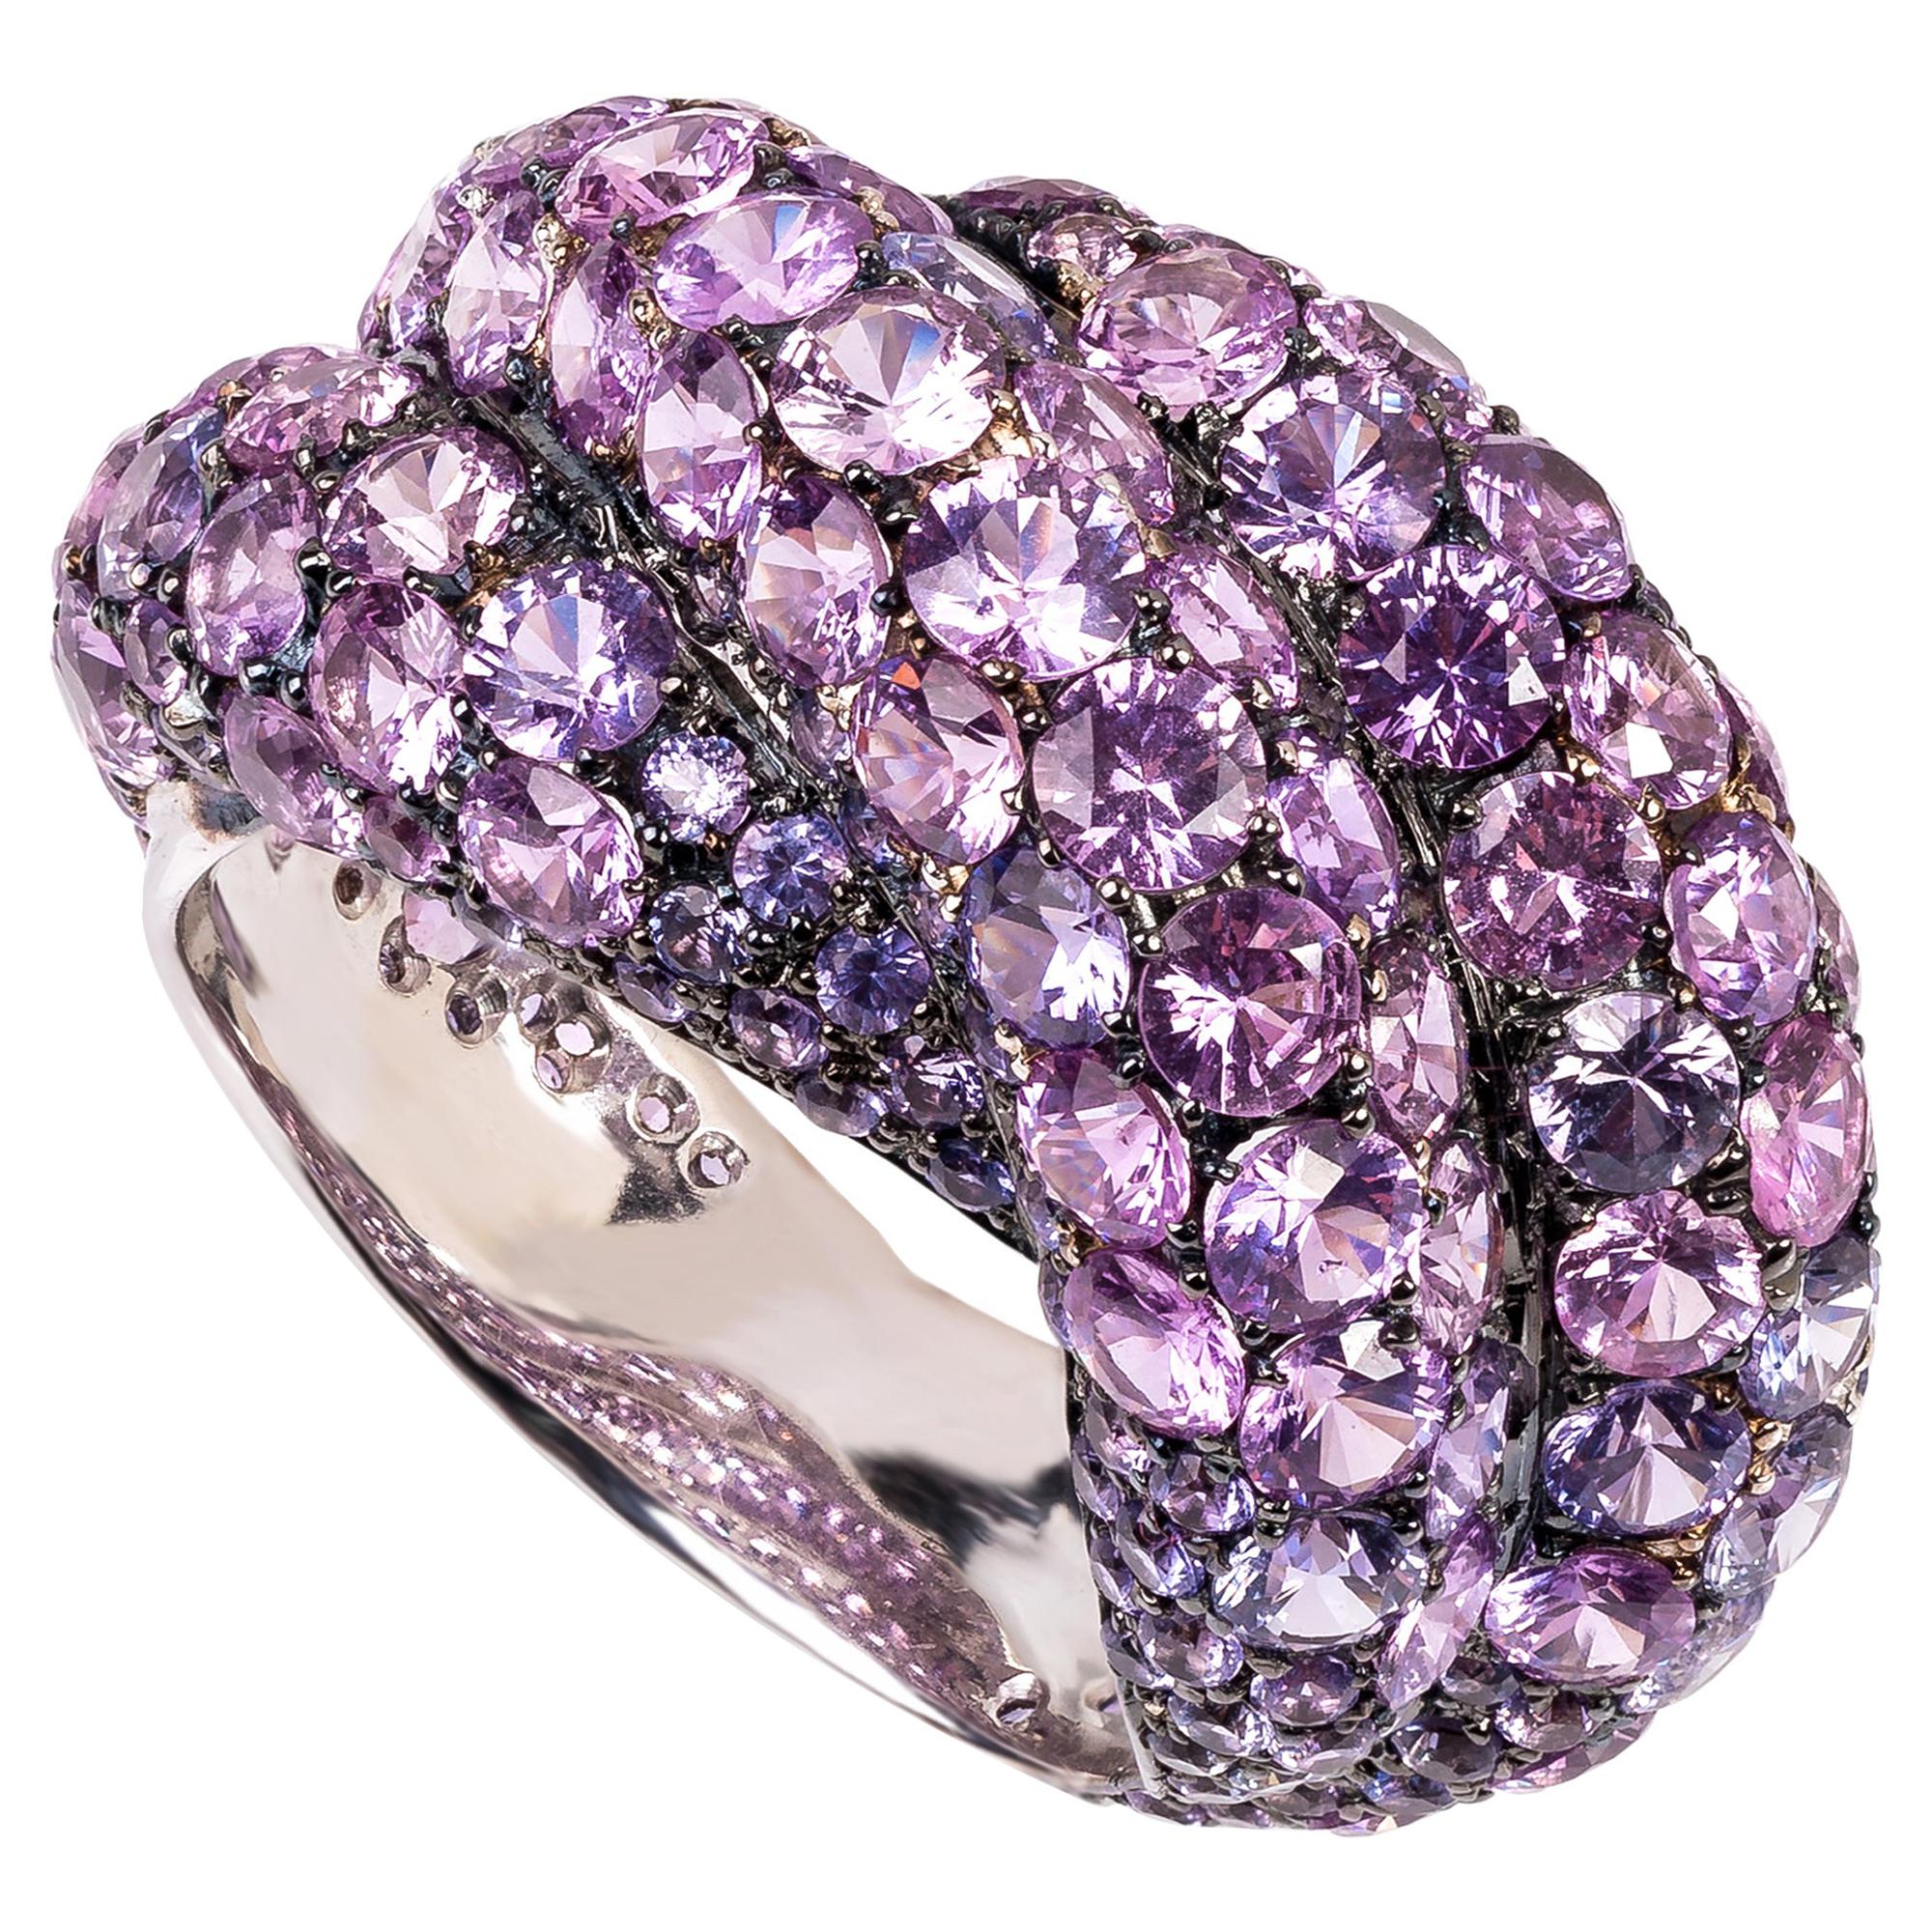 Rosior one-off Round Cut Pink Sapphire Cocktail Ring set in White Gold